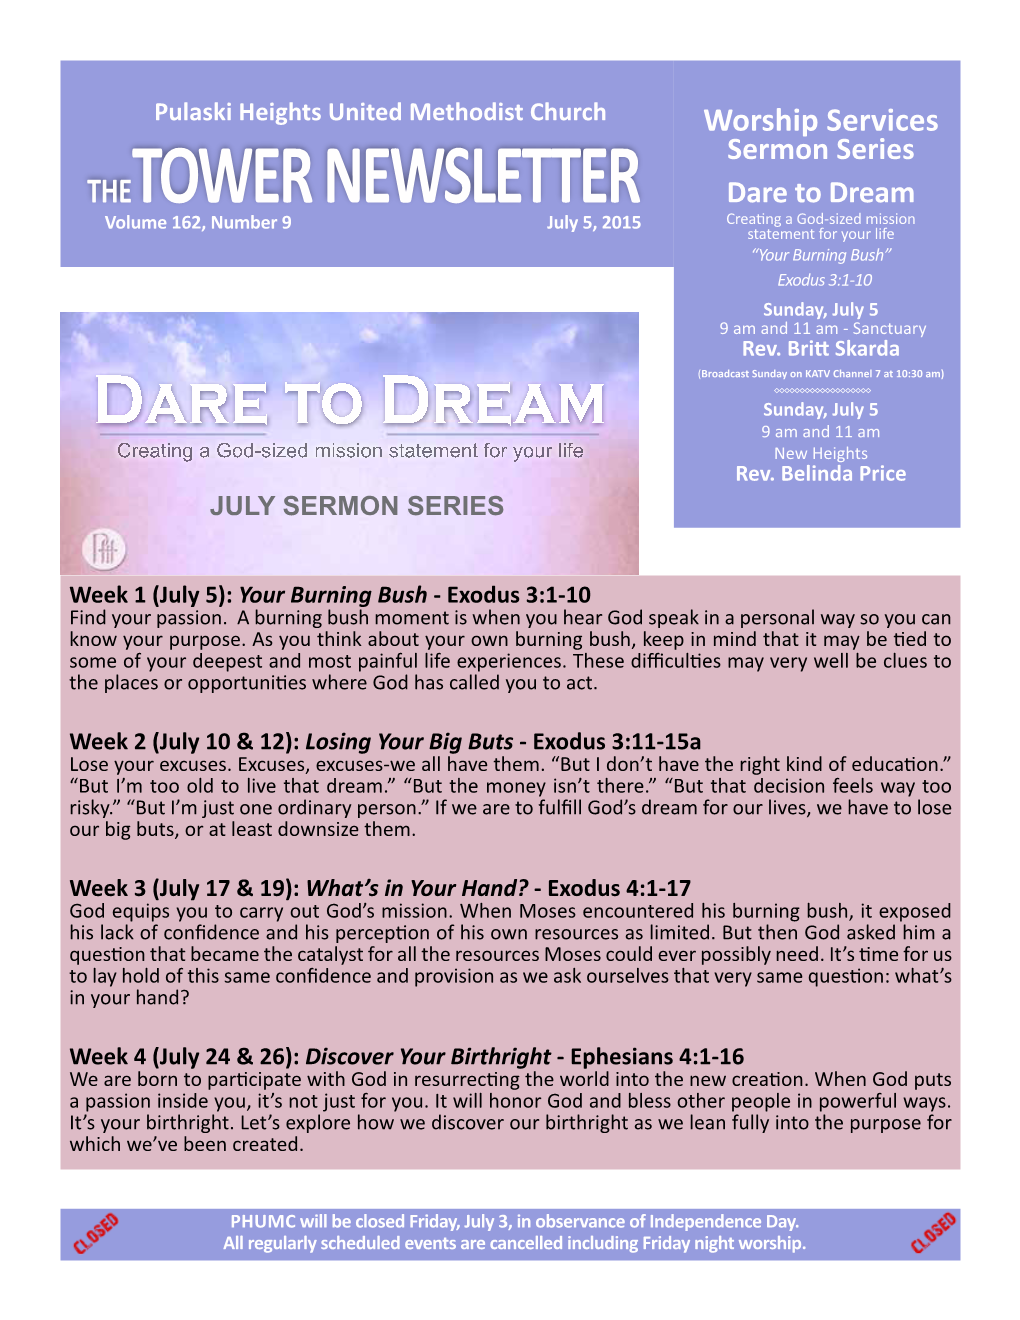 The-Tower-Newsletter